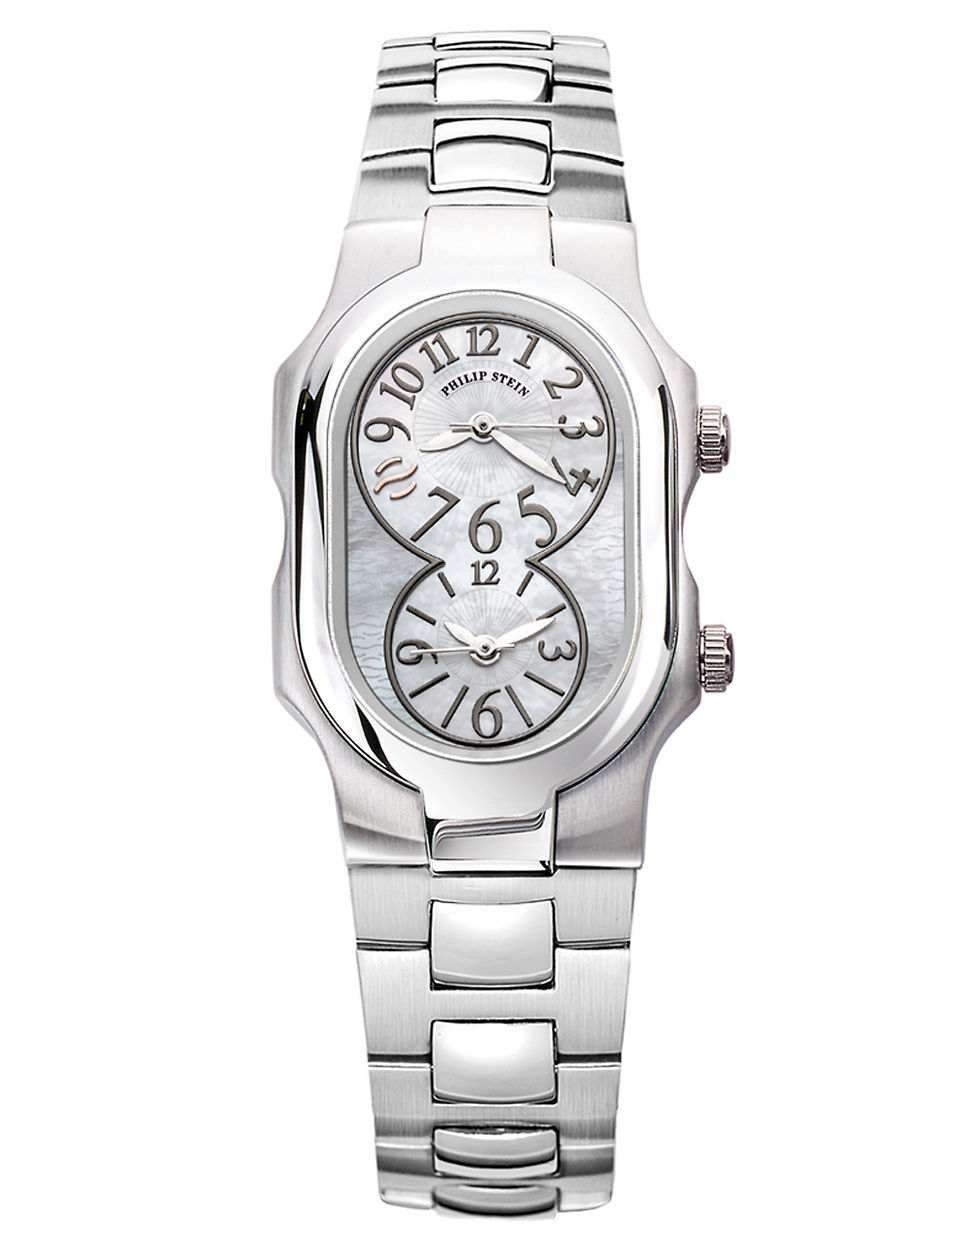 Lyst - Philip Stein Ladiesâ Signature Stainless Steel Dual Time Zone ...